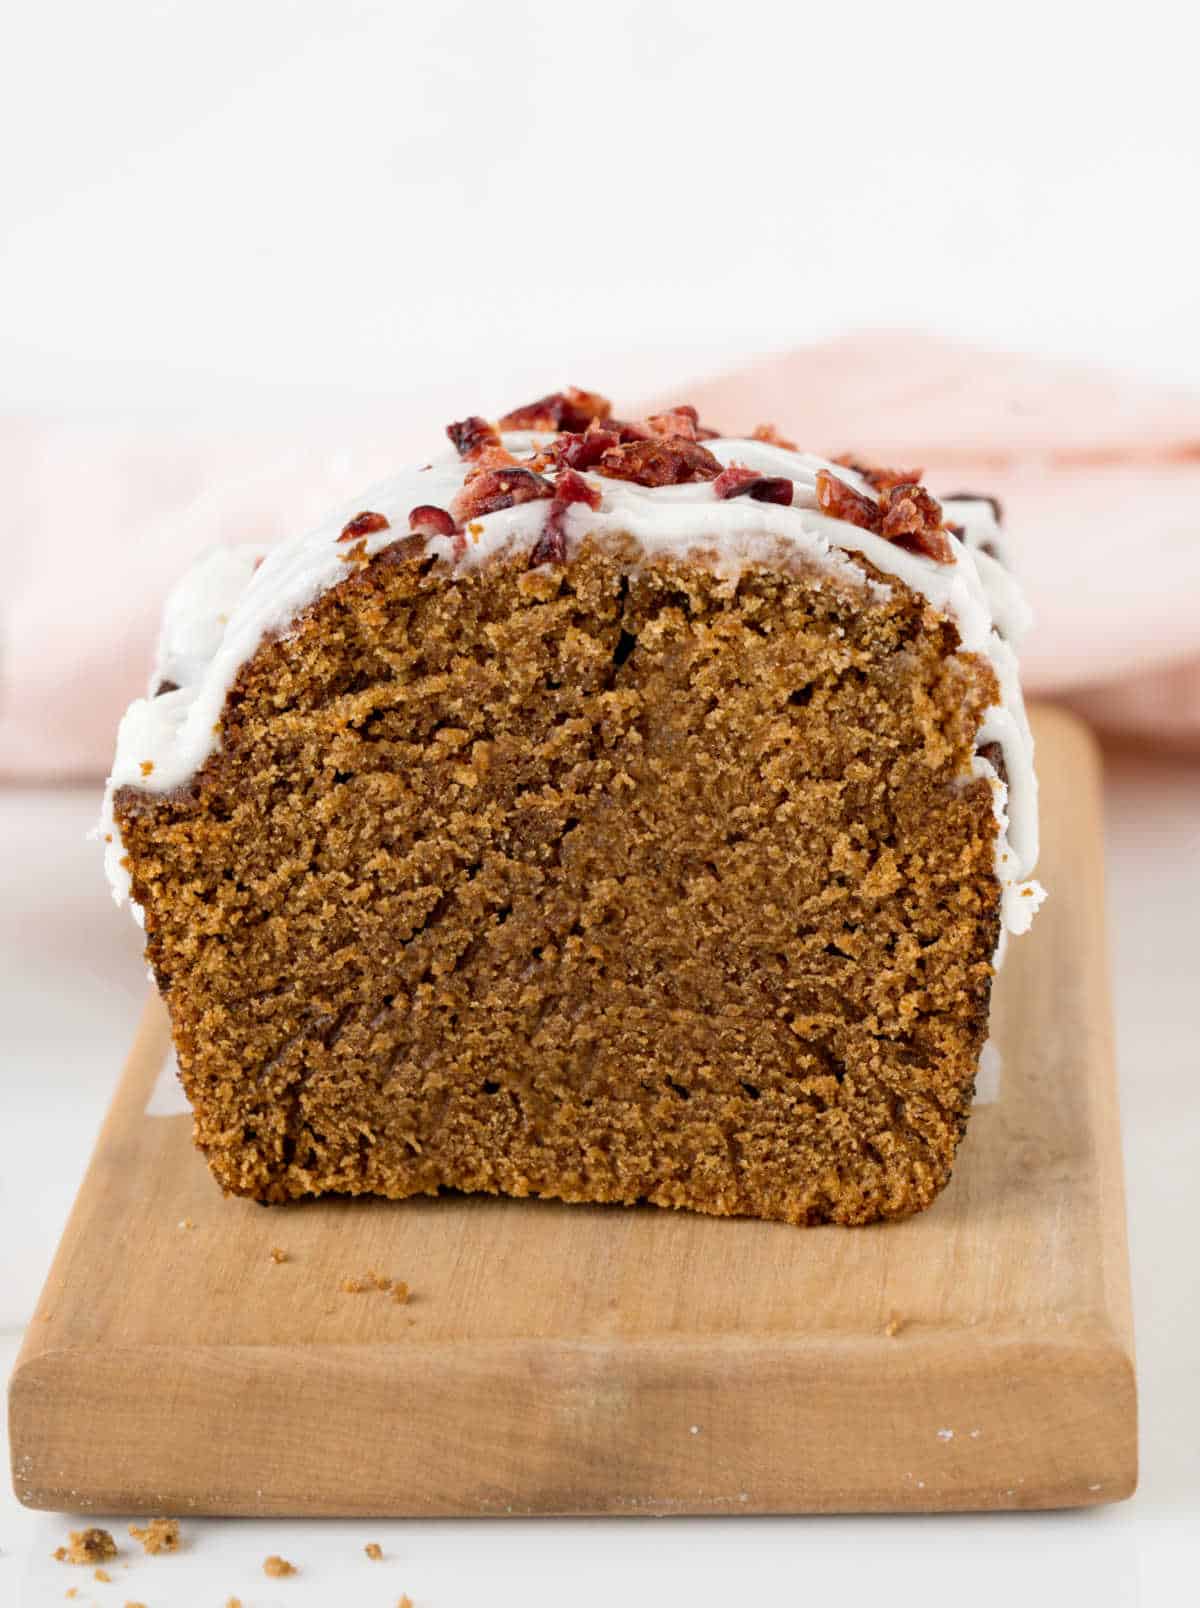 Front view of glazed gingerbread loaf on a light-colored wooden board. White and pink background.